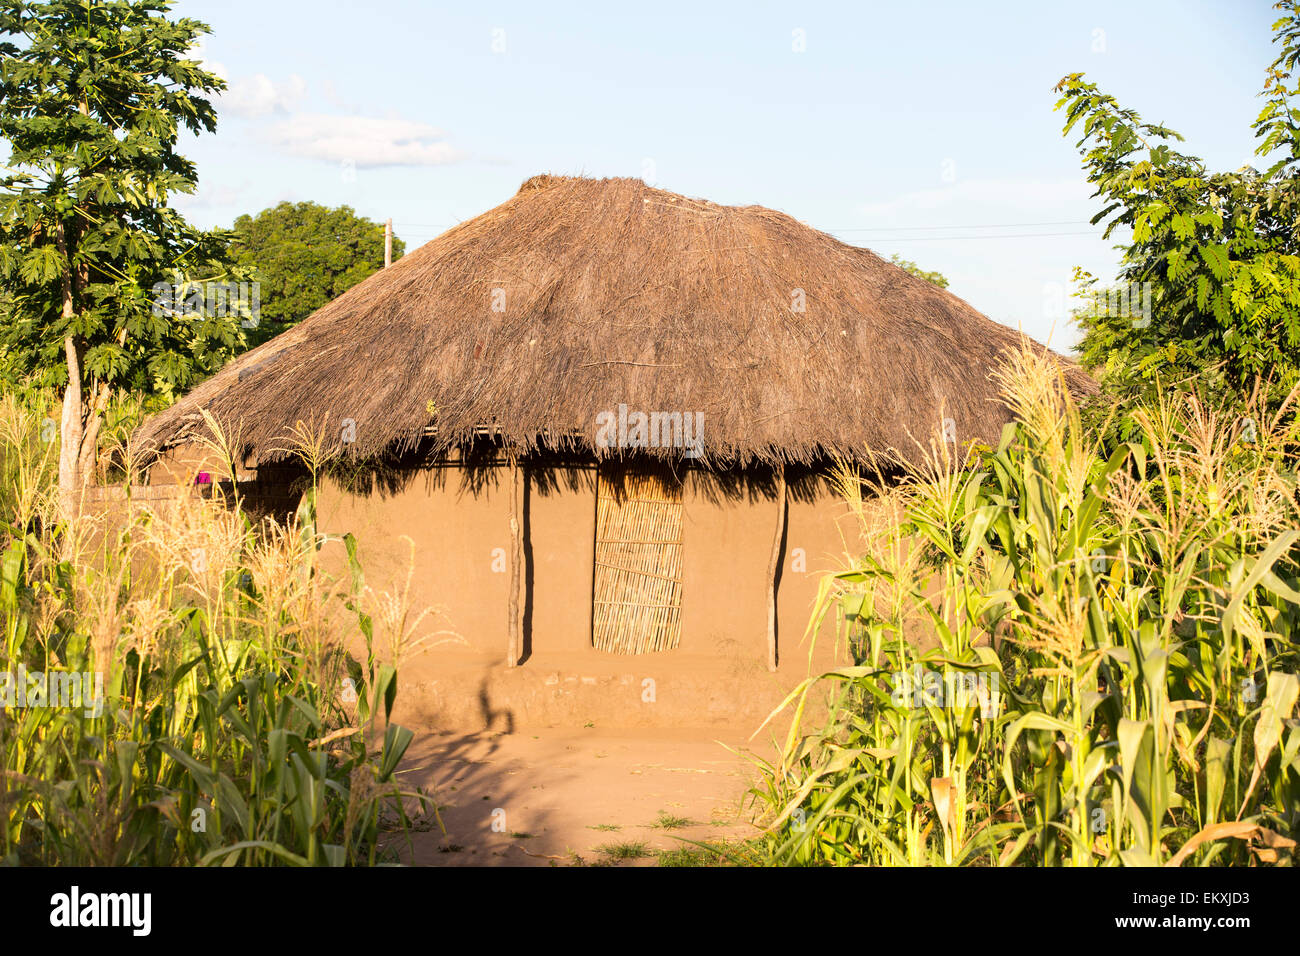 Malawi is one of the poorest countries in the world, many people still live in traditional mud hut houses with grass thatched ro Stock Photo